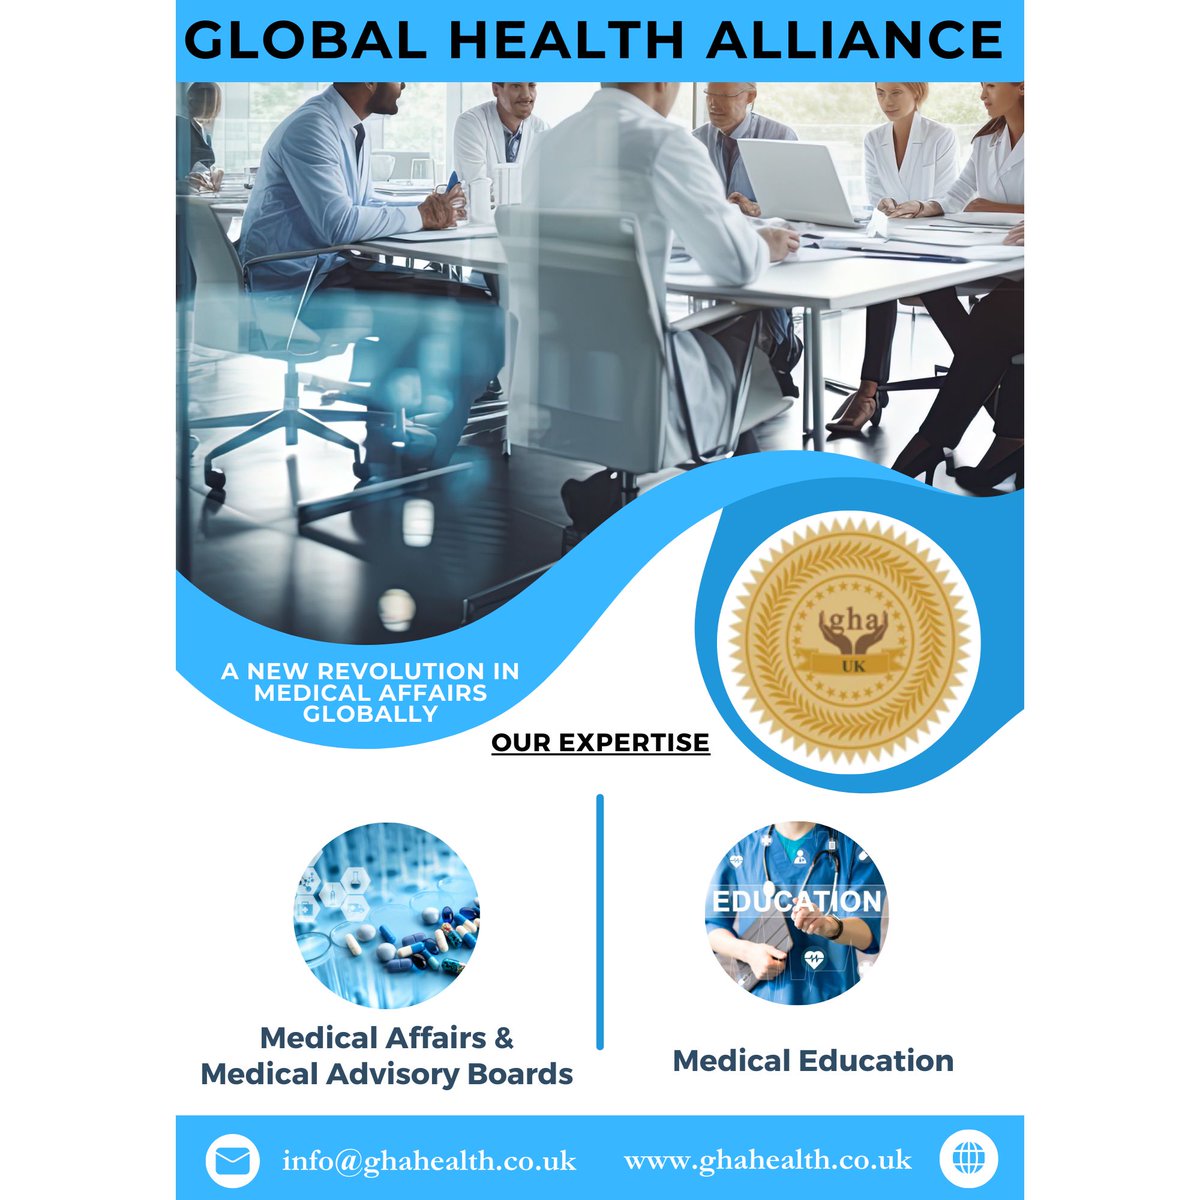 New #Revolution in #Medical #Affairs #Globally @GhaHealth #Medical #affairs #healthcare #mnc #pharma #Medical #arabhealth #Knowledge #Innovation #HealthTech #HealthForAll #MedEd #nurses #Doctors #Hospitals #pharmaceuticals #affairs #Medicalservices #MedTwitter